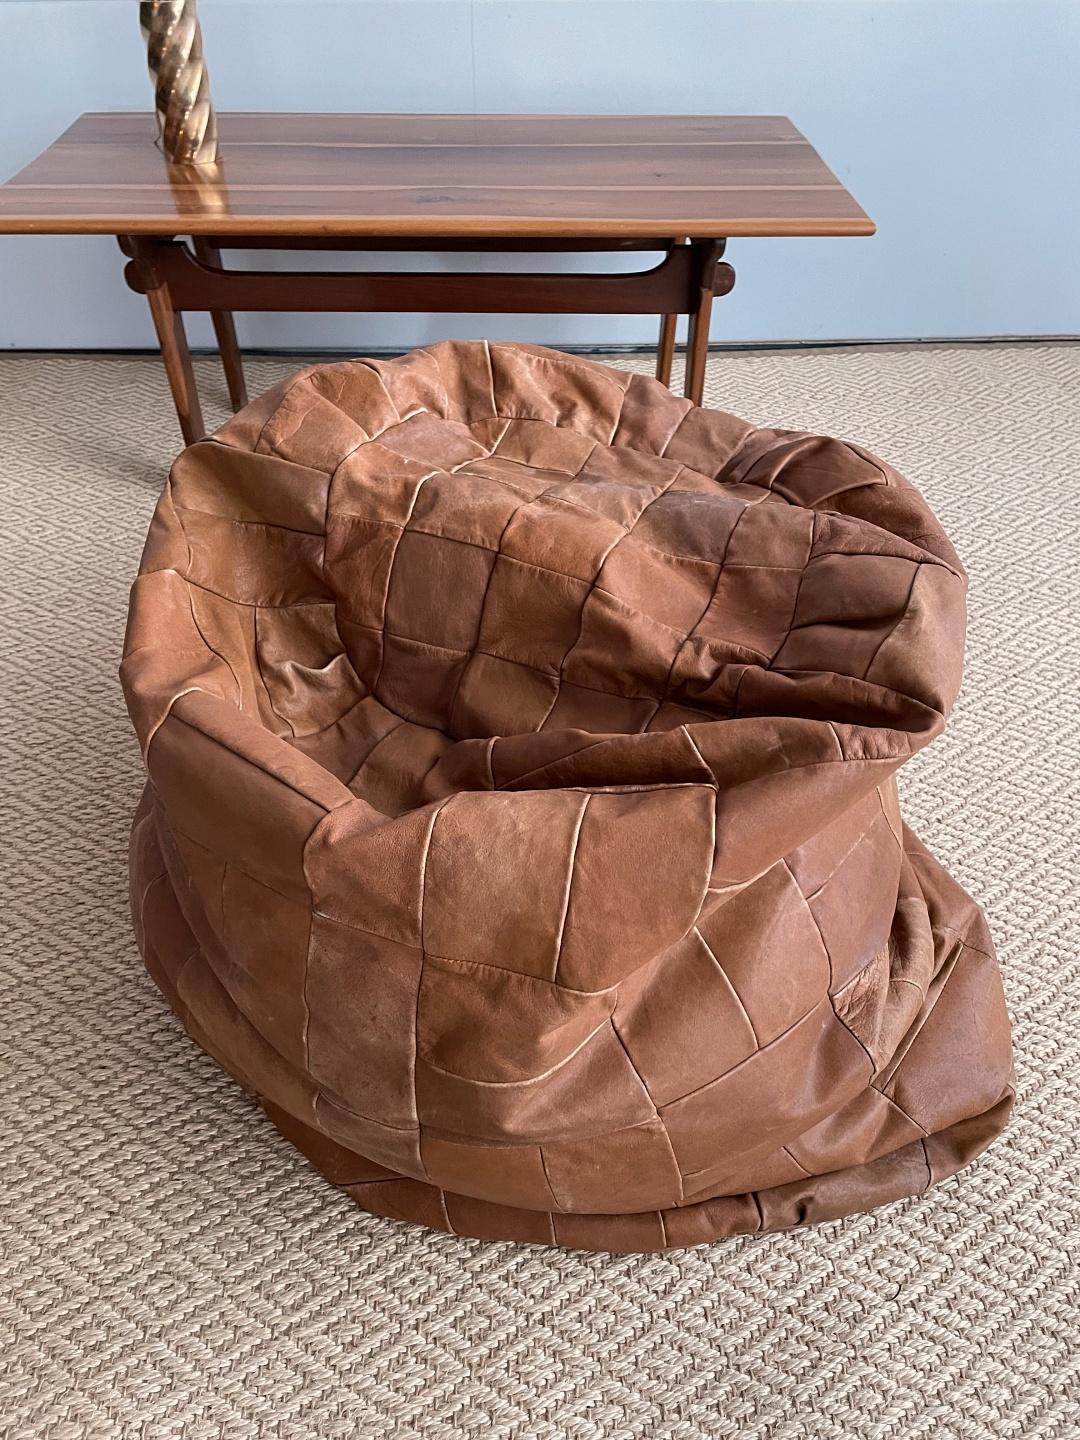 Unique and decorative handmade De Sede soft leather bean bag. The bean bag is in very good condition with lovely patina, high seating comfort.

Detailed condition: Very good, this vintage item has no defects, but it may show slight traces of use.